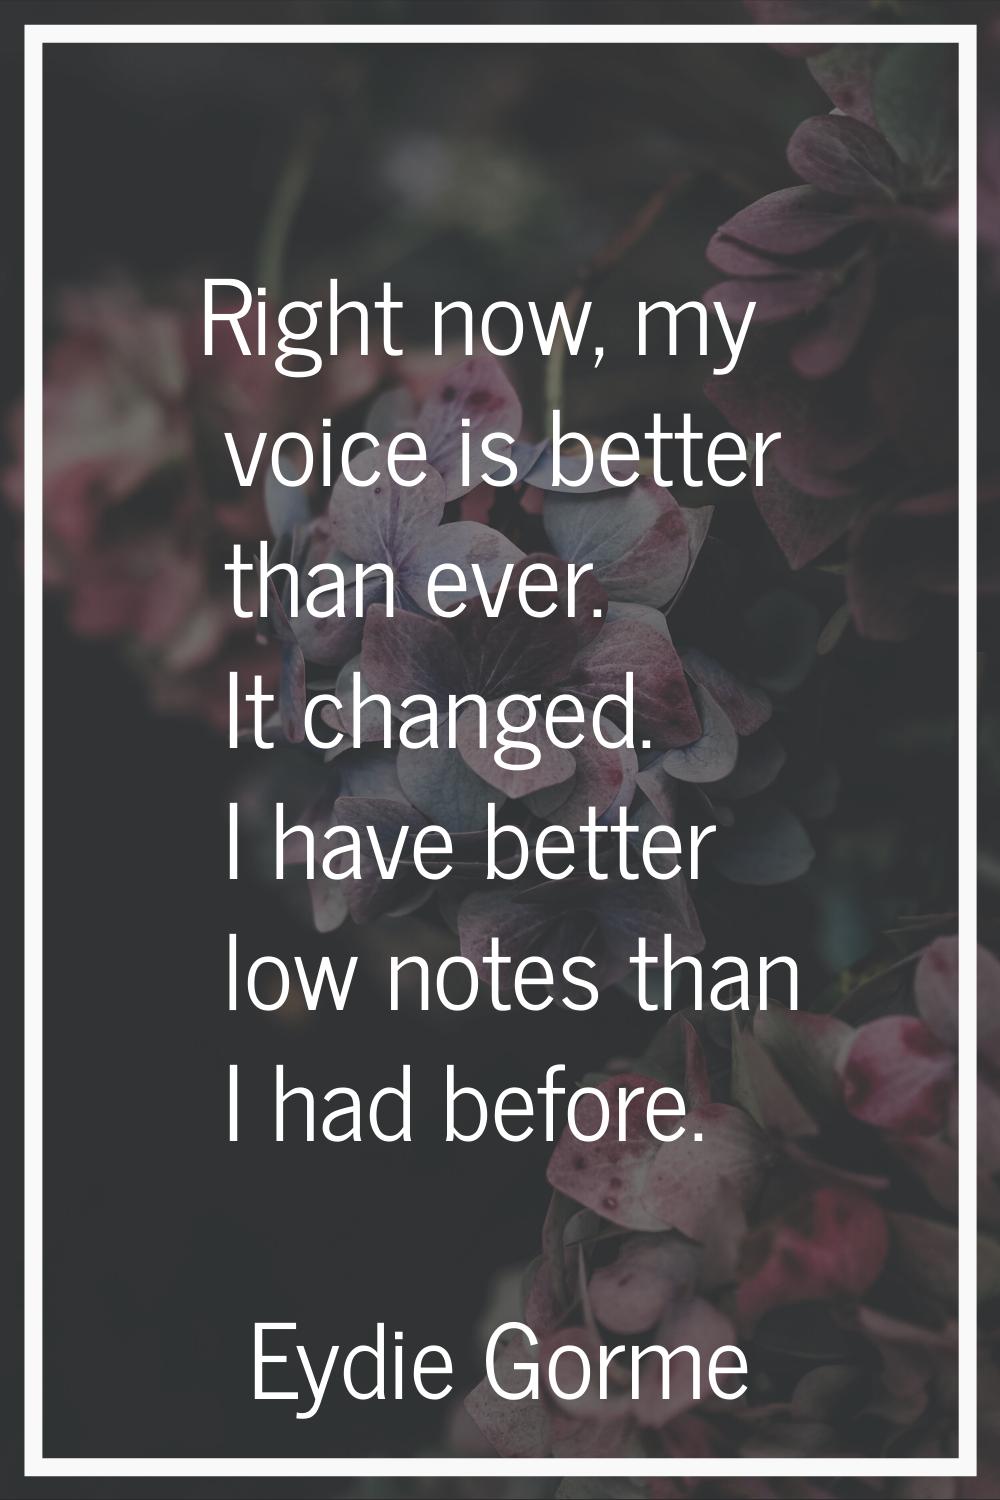 Right now, my voice is better than ever. It changed. I have better low notes than I had before.